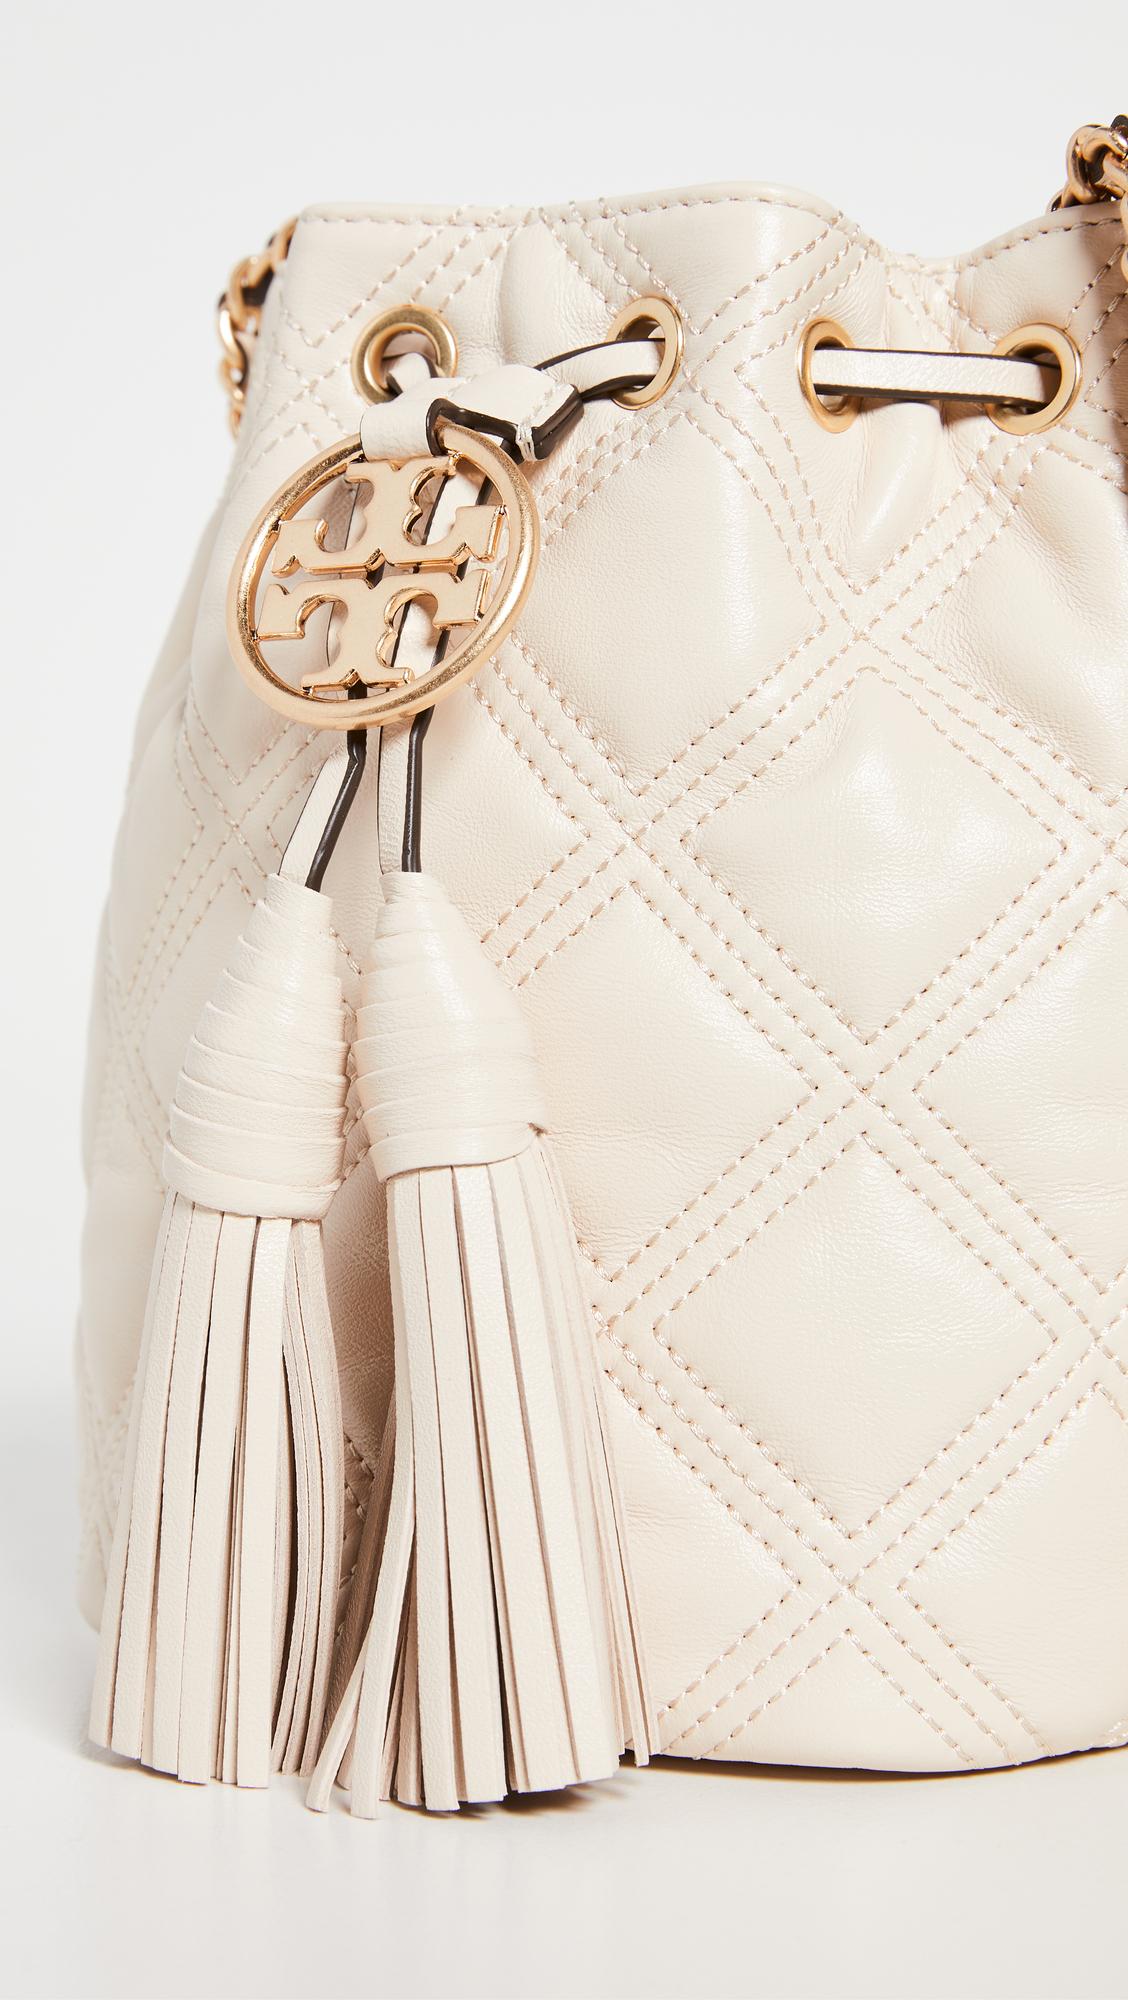 Tory Burch Leather Fleming Soft Mini Bucket Bag in Natural - Save 